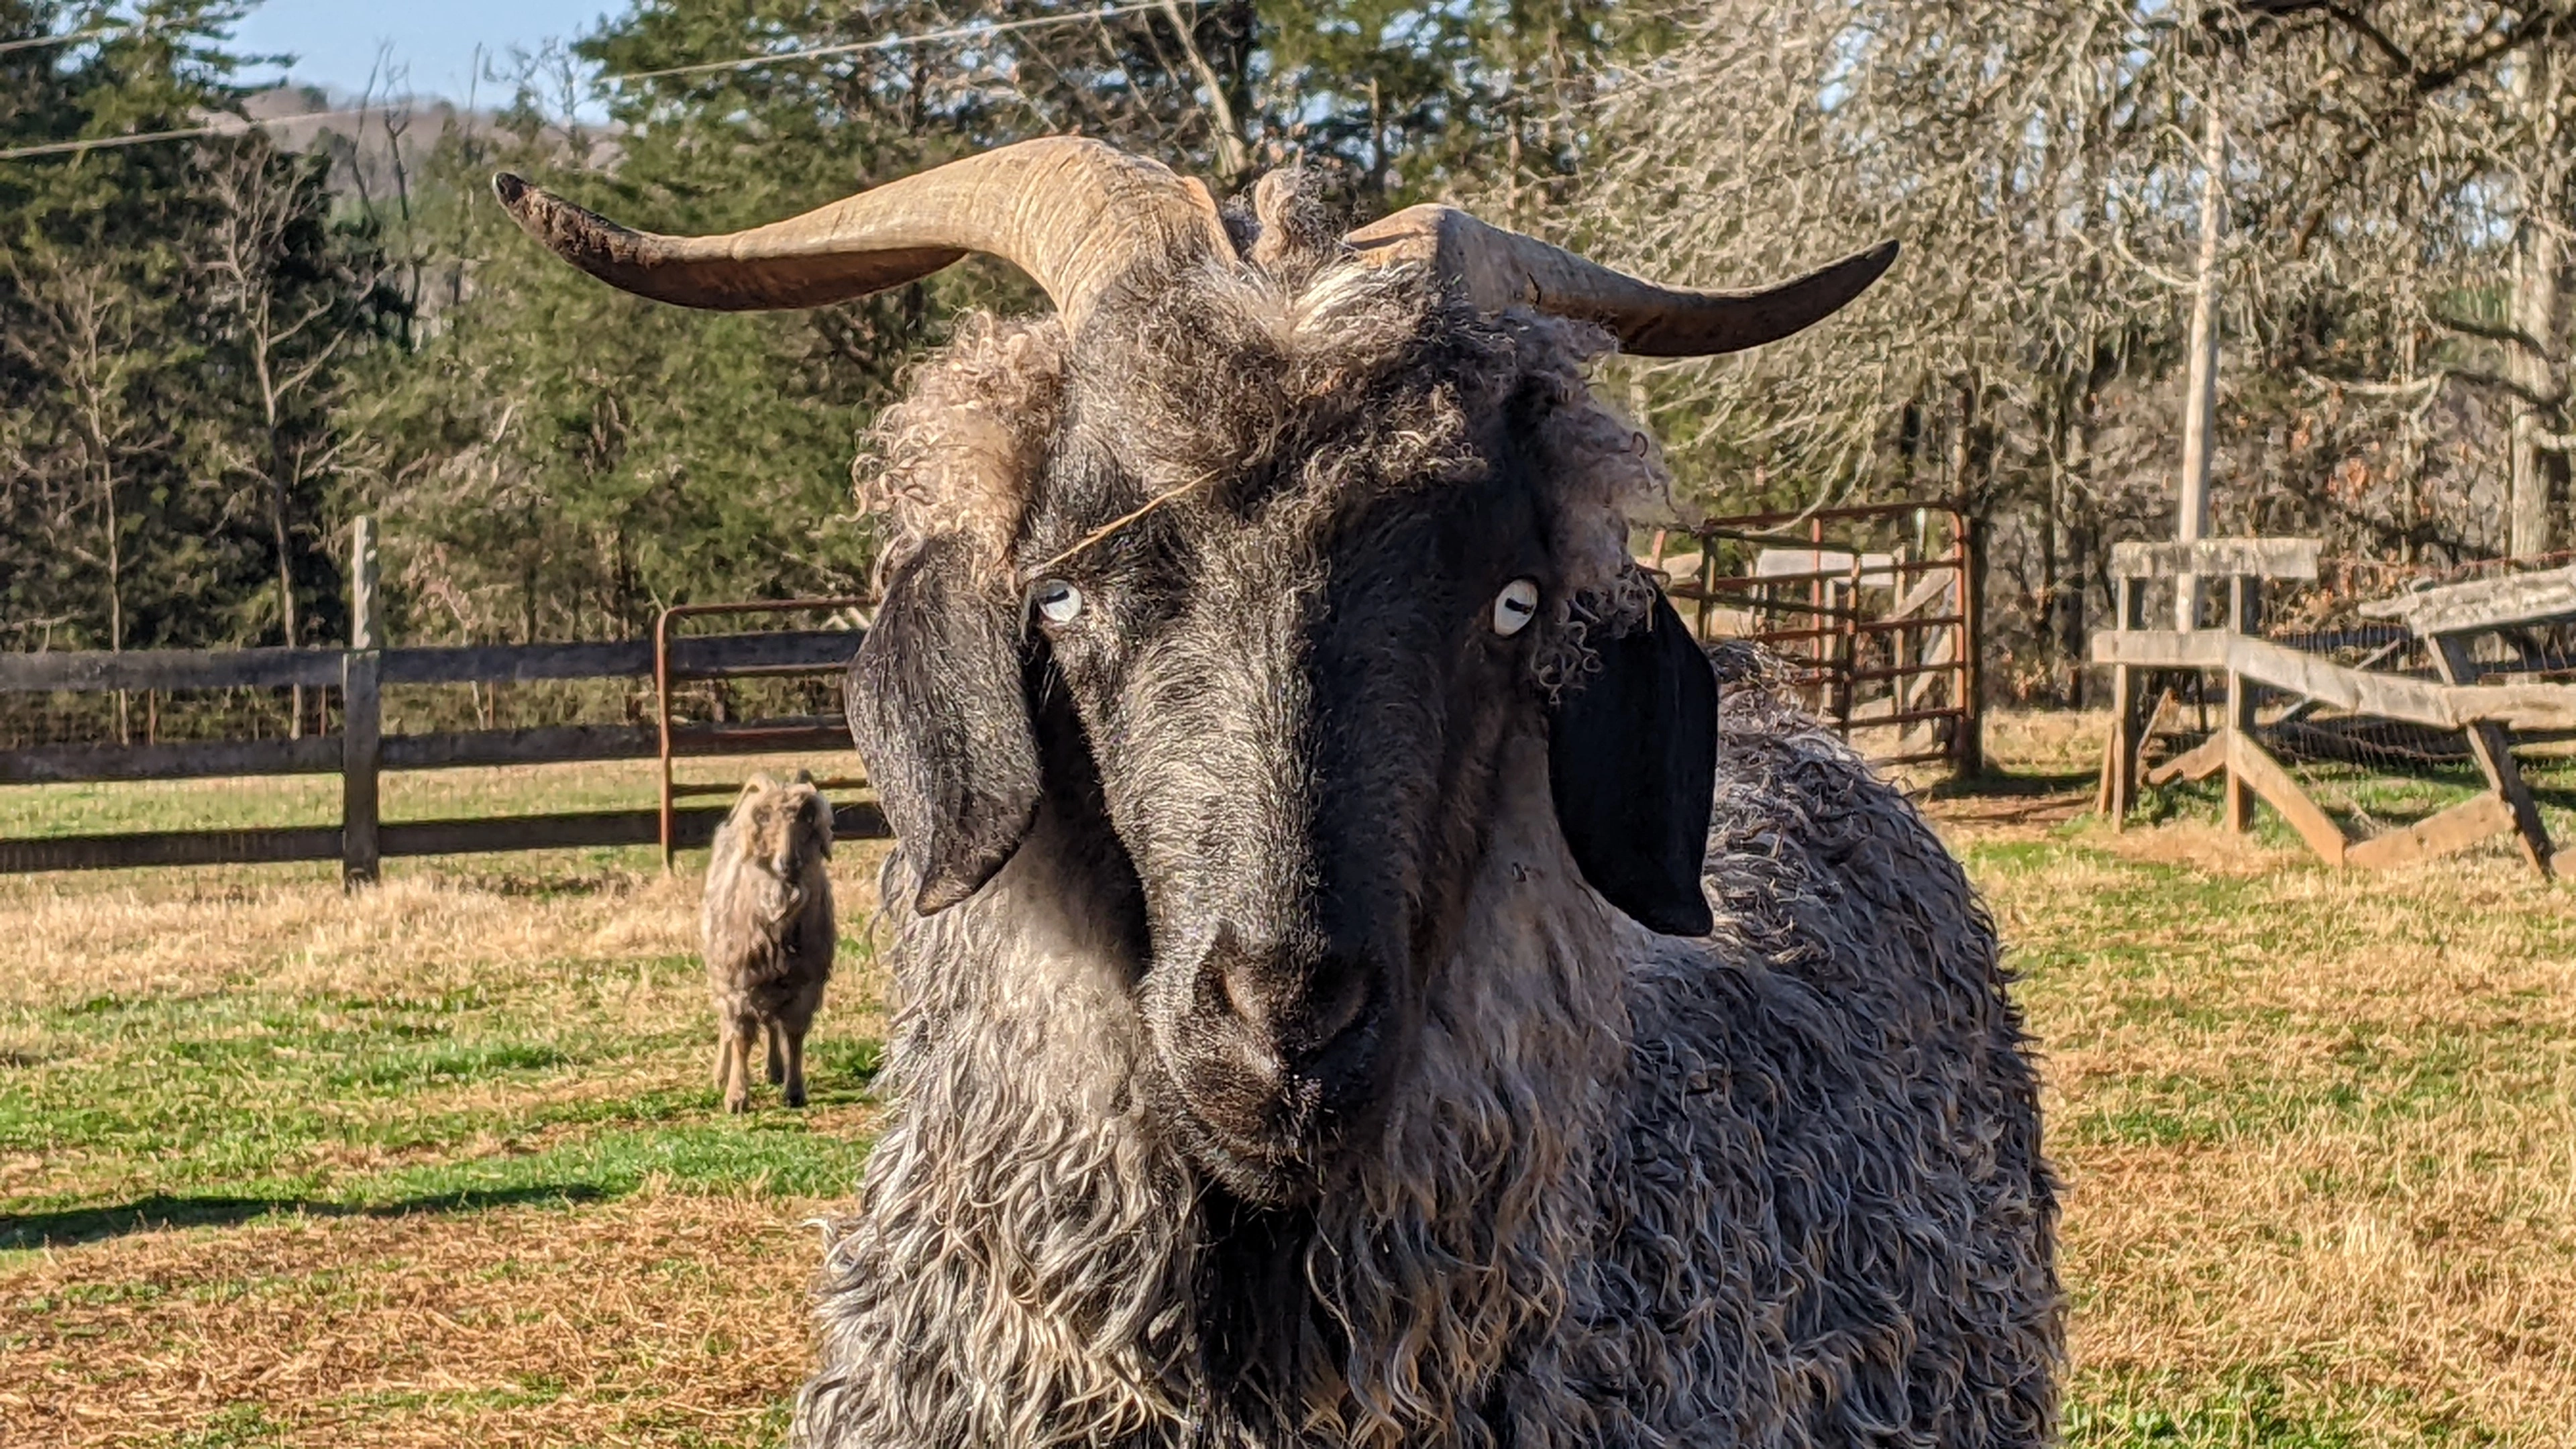 An image of a goat named Norville